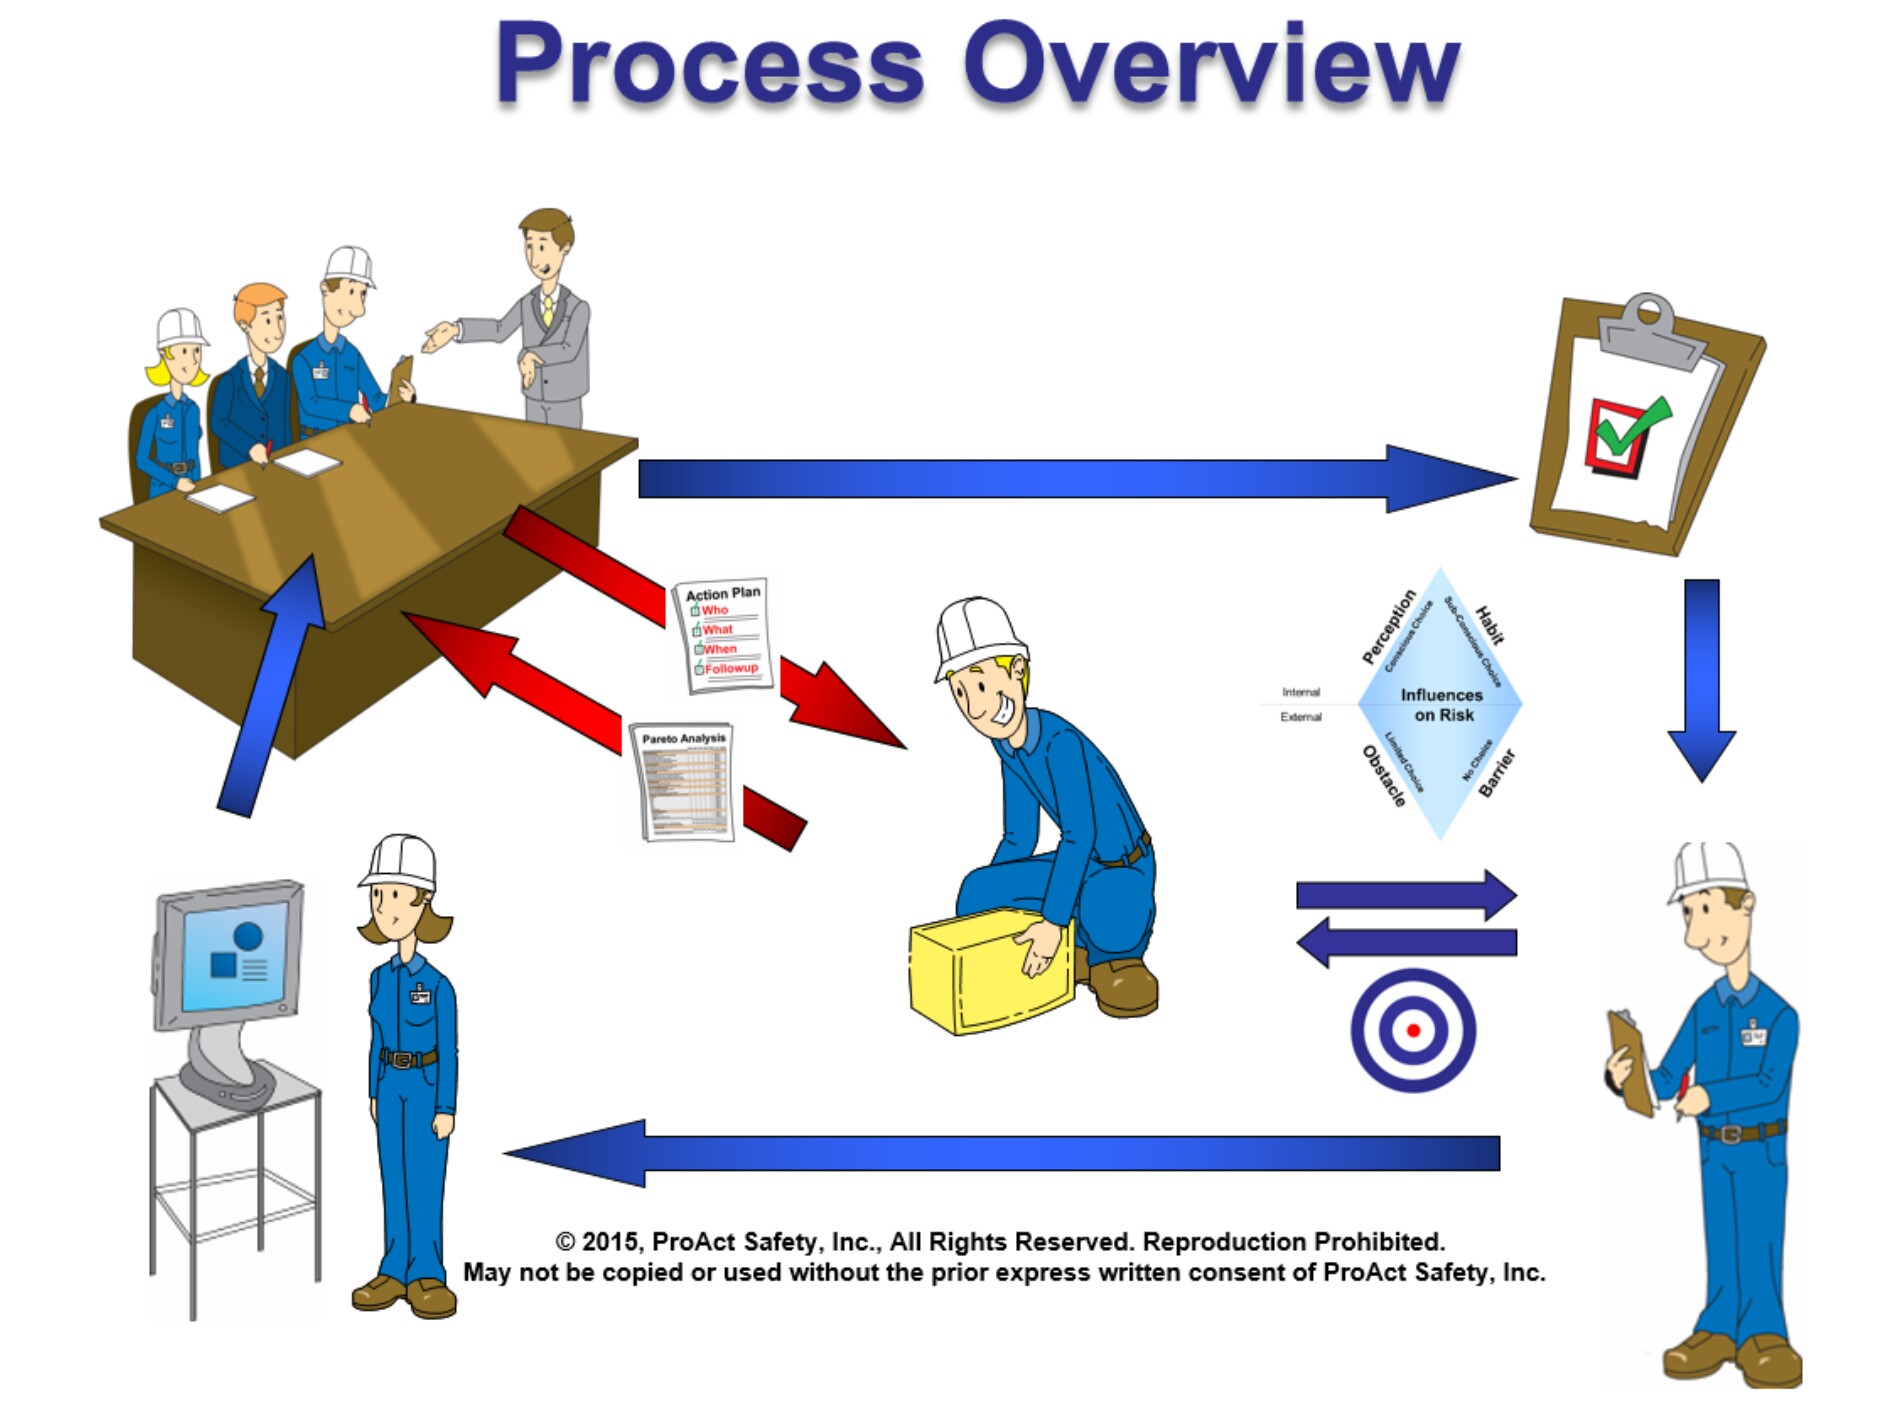 custom-lean-behavior-based-safety-programs-from-proact-safety-from